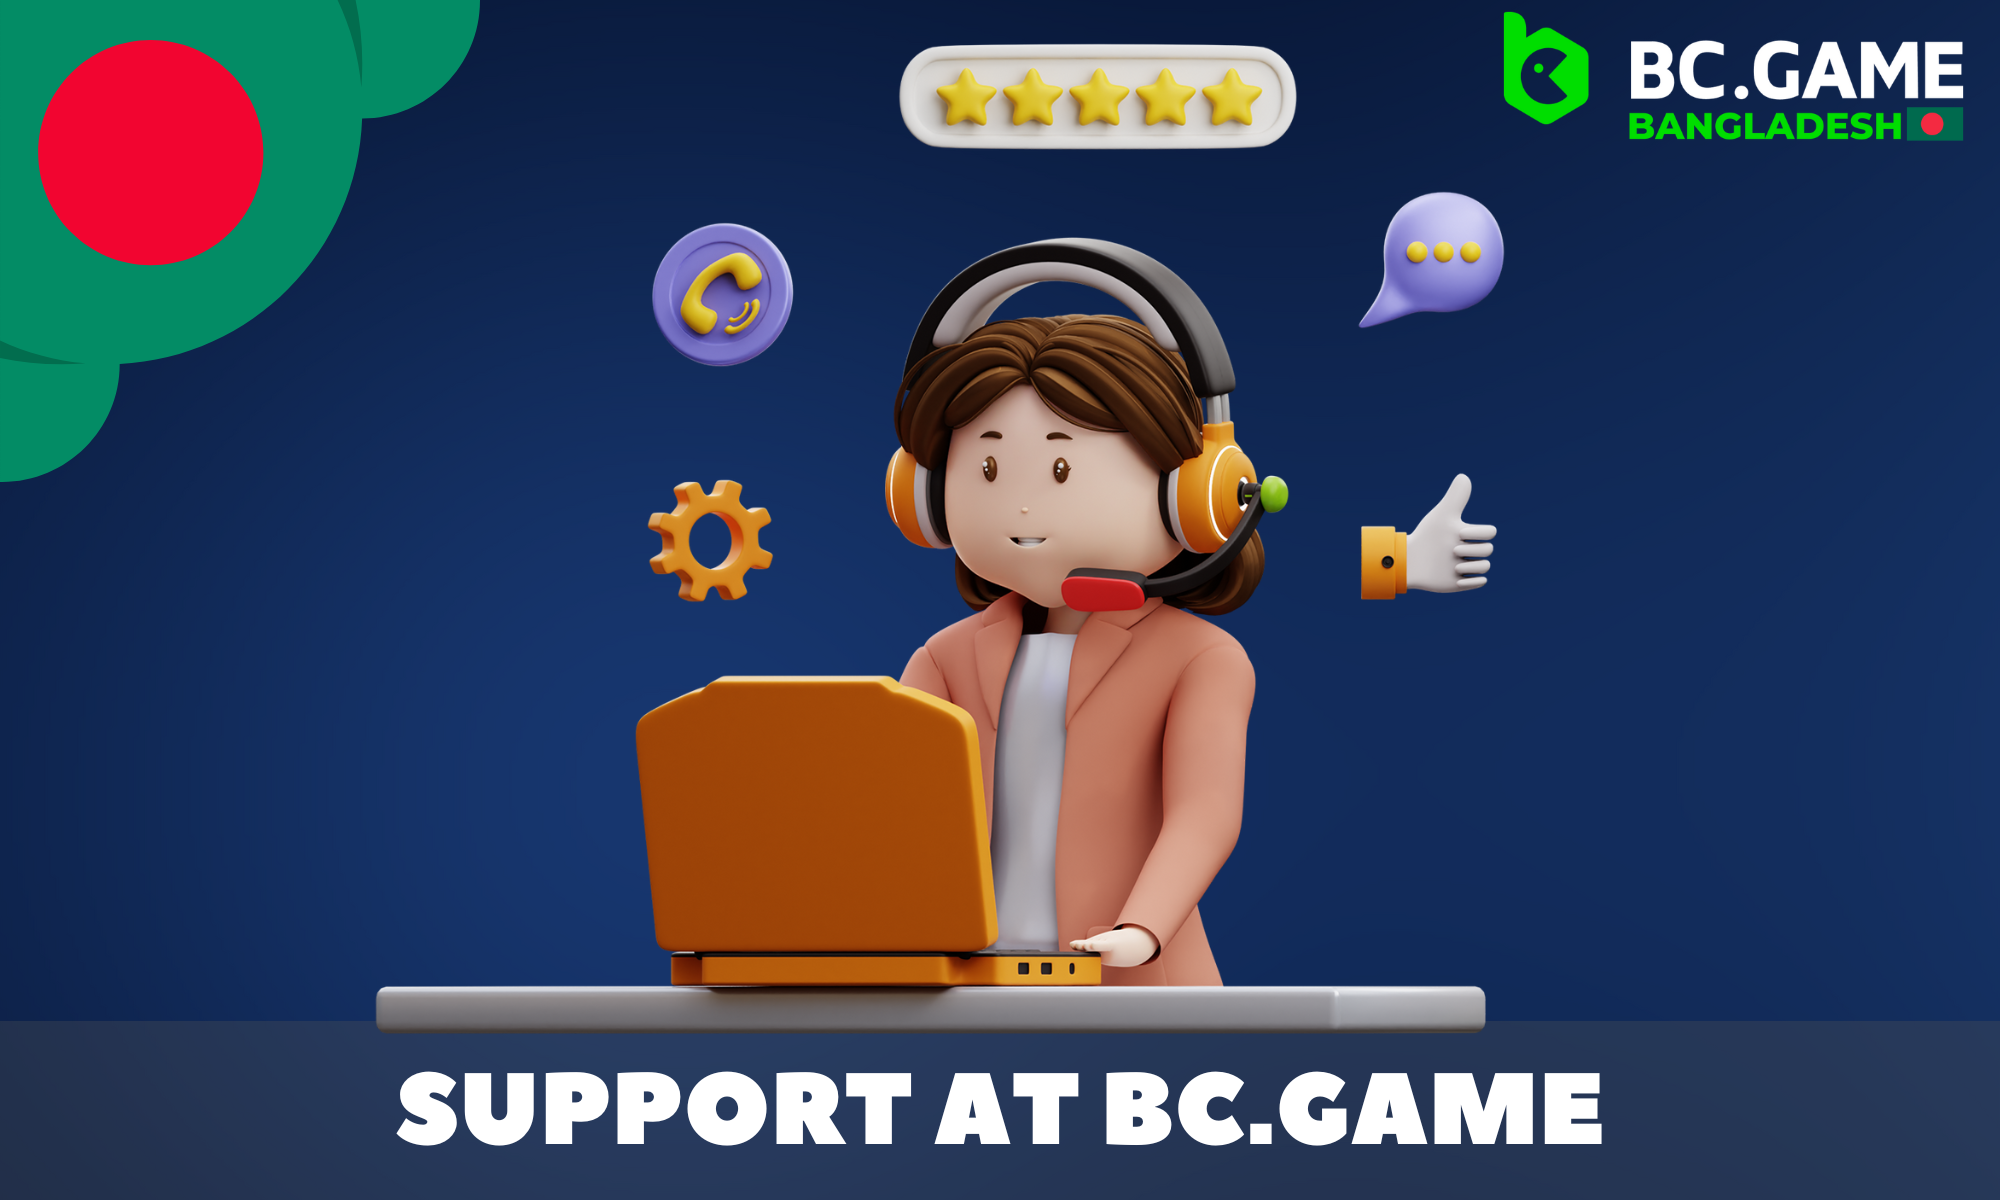 BC.GAME Bangladesh has a round-the-clock customer support service